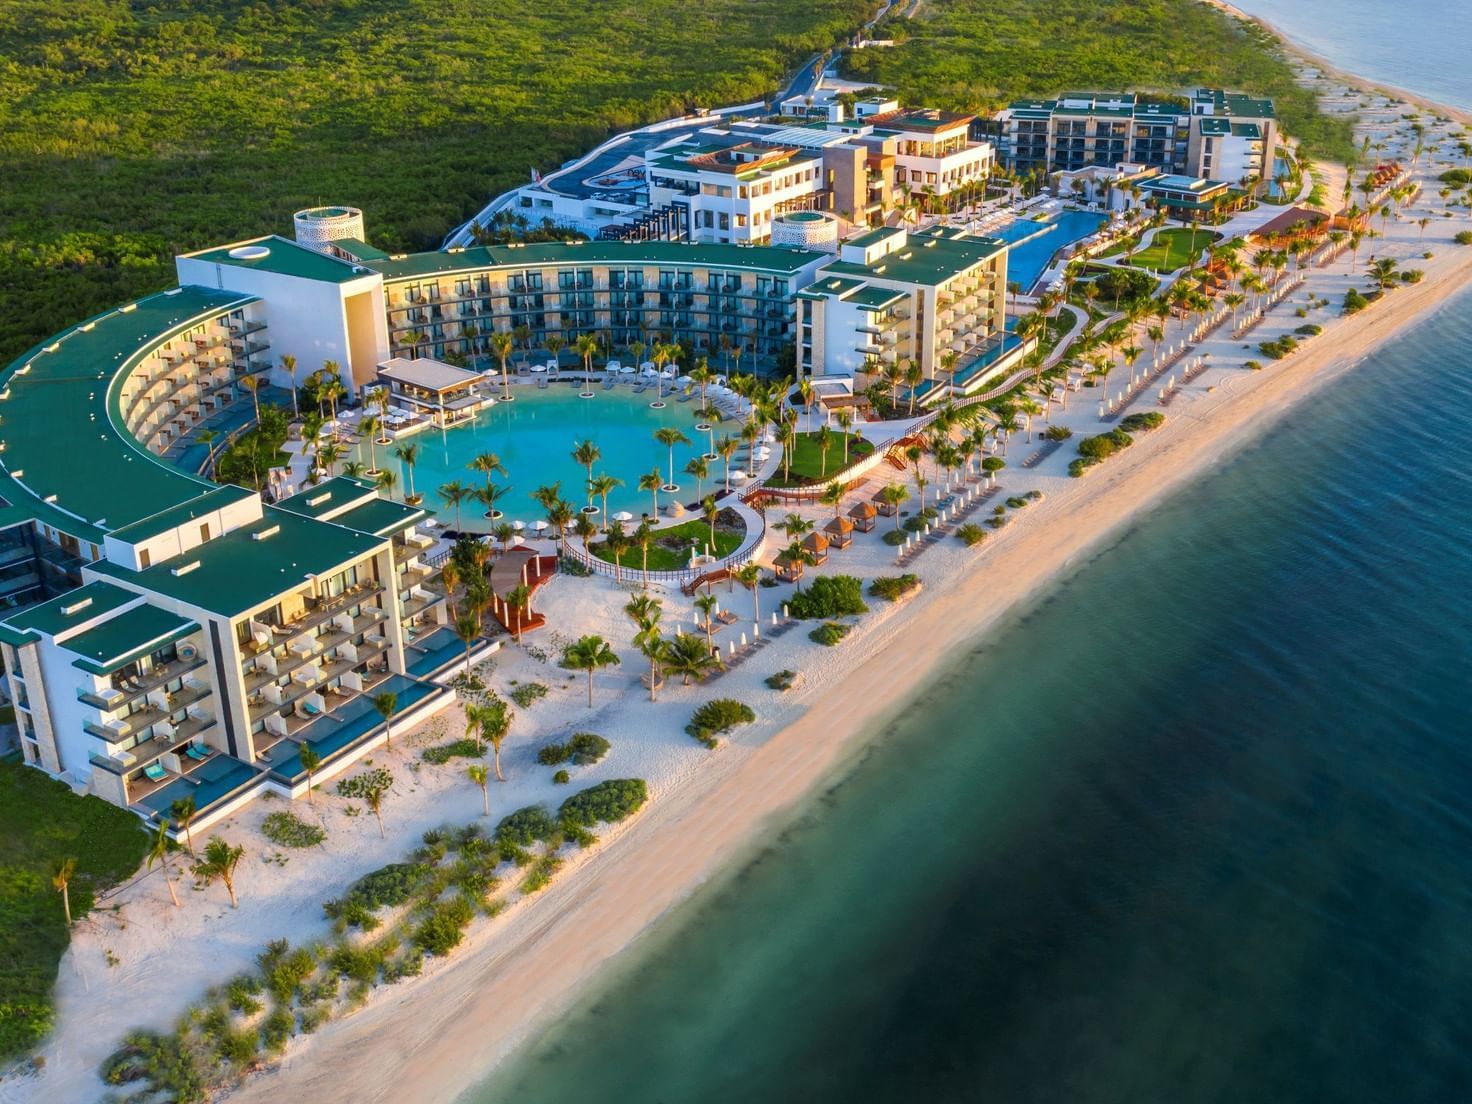 Property image of Haven Riviera Cancun